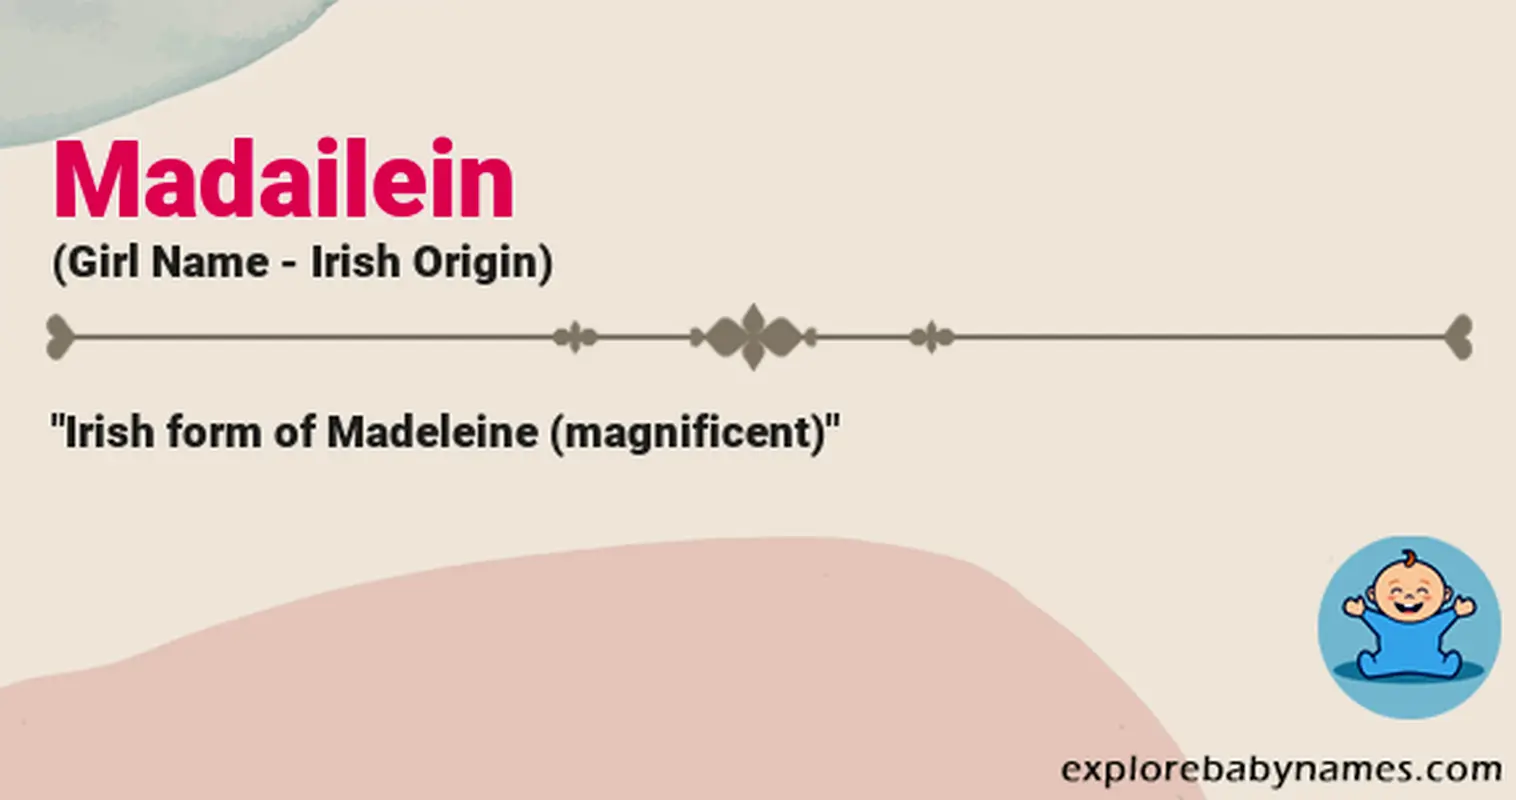 Meaning of Madailein